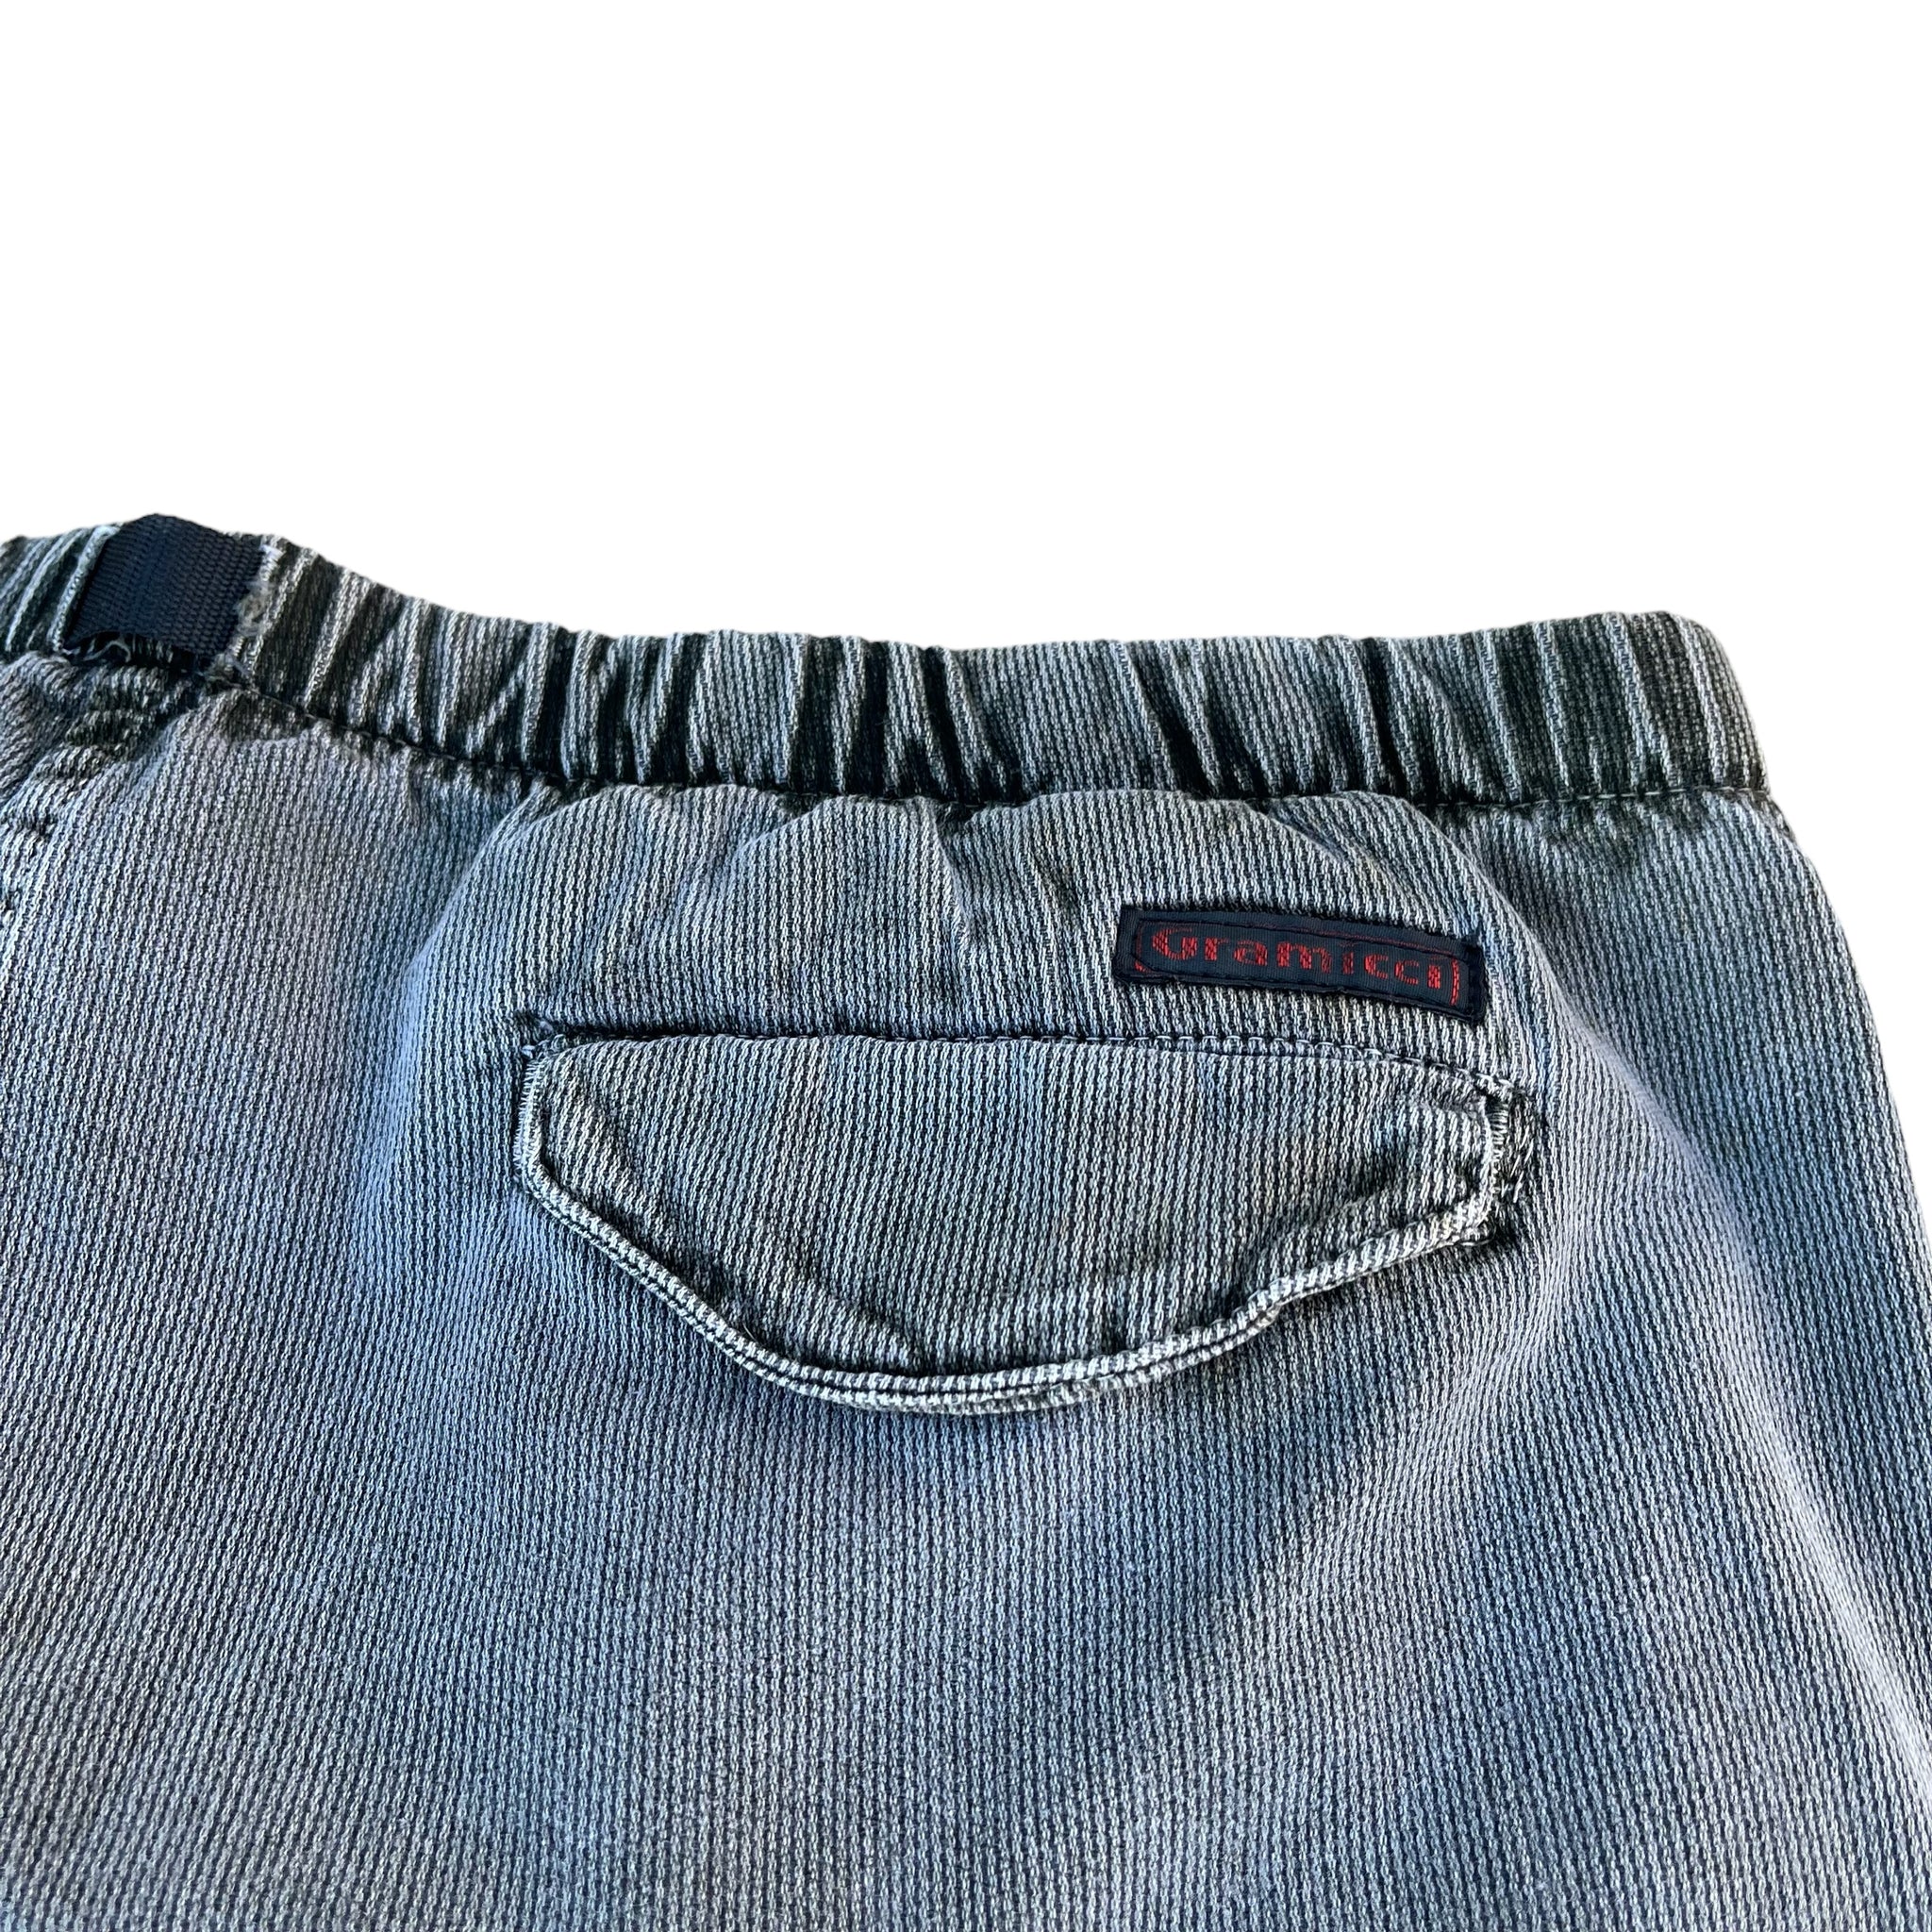 Made in USA Gramicci pants XL 36/43